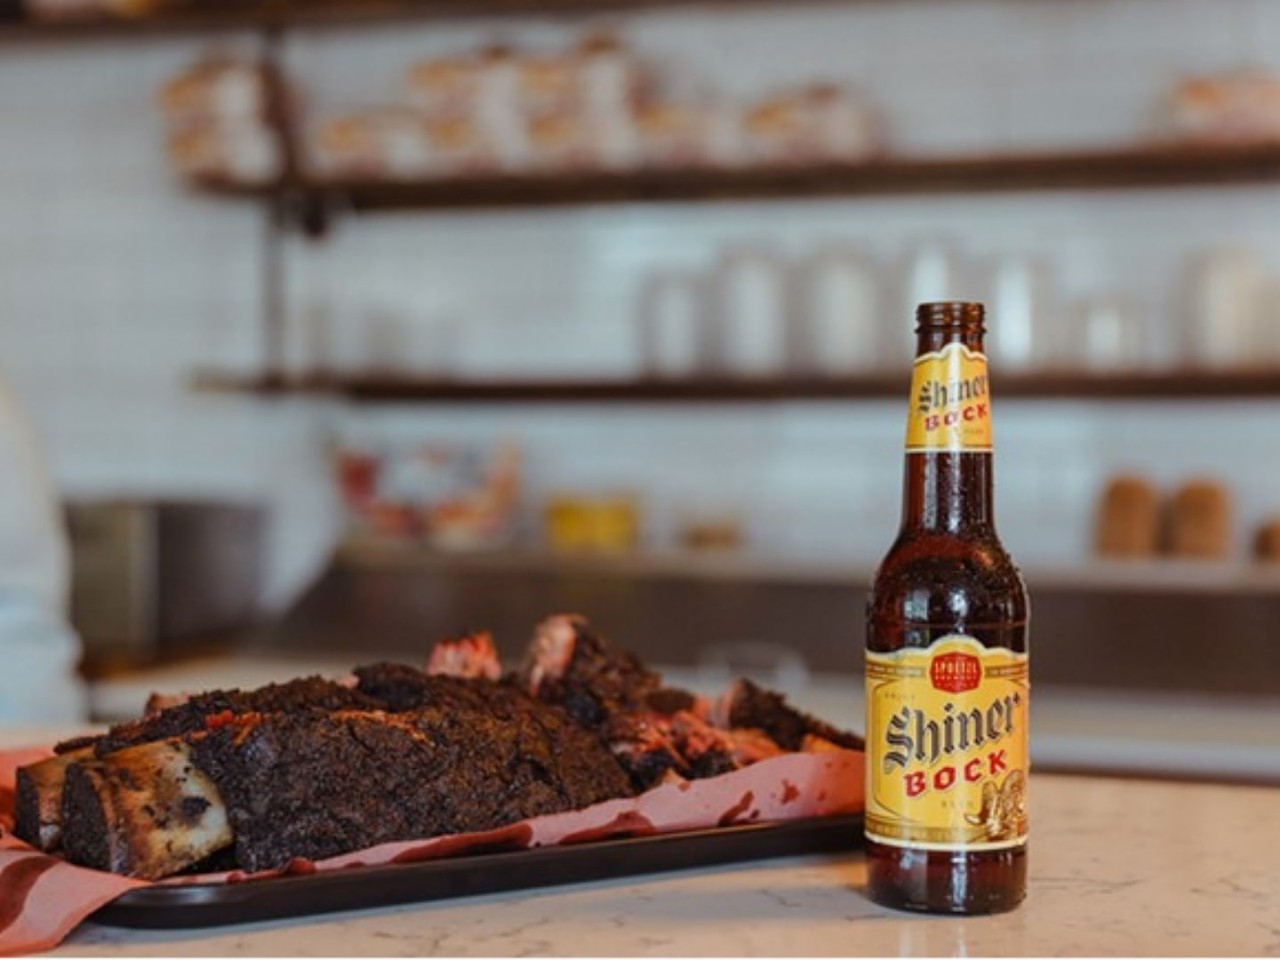 K. Spoetzl BBQ Co.
603 E. Brewery St., Shiner, (361) 401-7034,  shiner.com/brewery
Located in Spoetzl Brewery, a historic brewery of Shiner beer, this barbecue spot from Pit Master Tommy Schuette is serving up all the traditional barbecue fare, including locally sourced brisket, ribs, pulled pork and sausage as well as loaded baked potatoes and sandwiches.